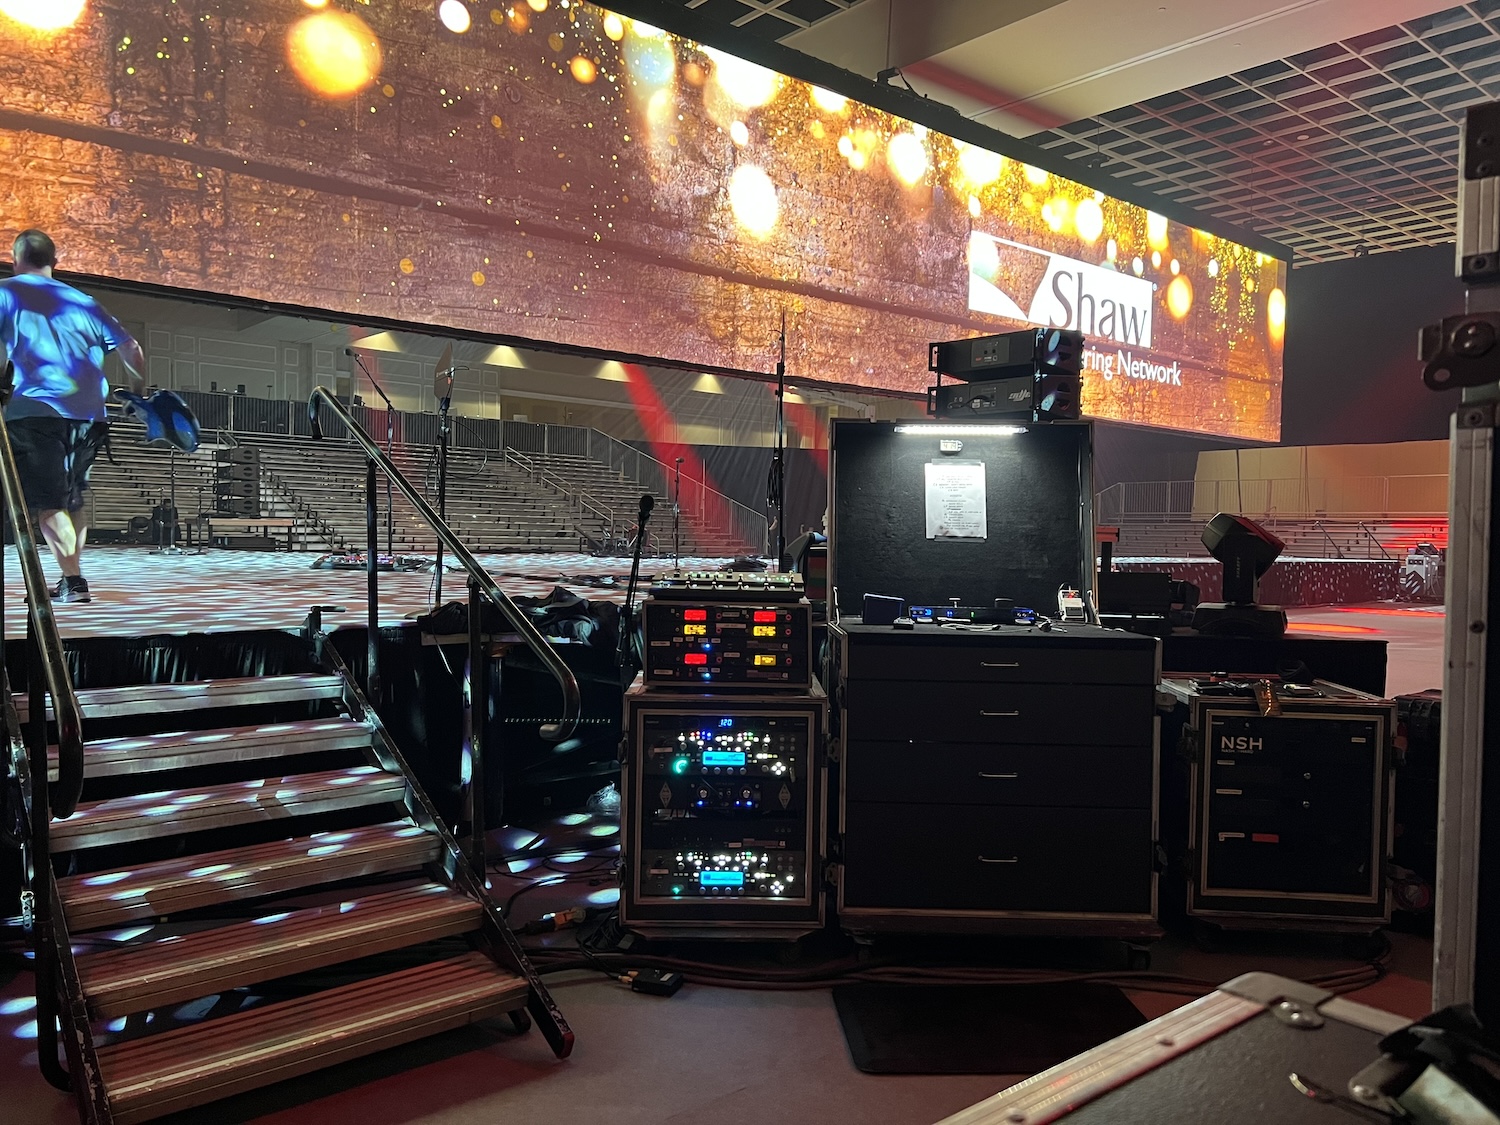 Backstage view at an event with technical equipment and racks, a large screen with 'Shaw Connecting Network' branding, and steps leading up to an empty stage with seating in the background.